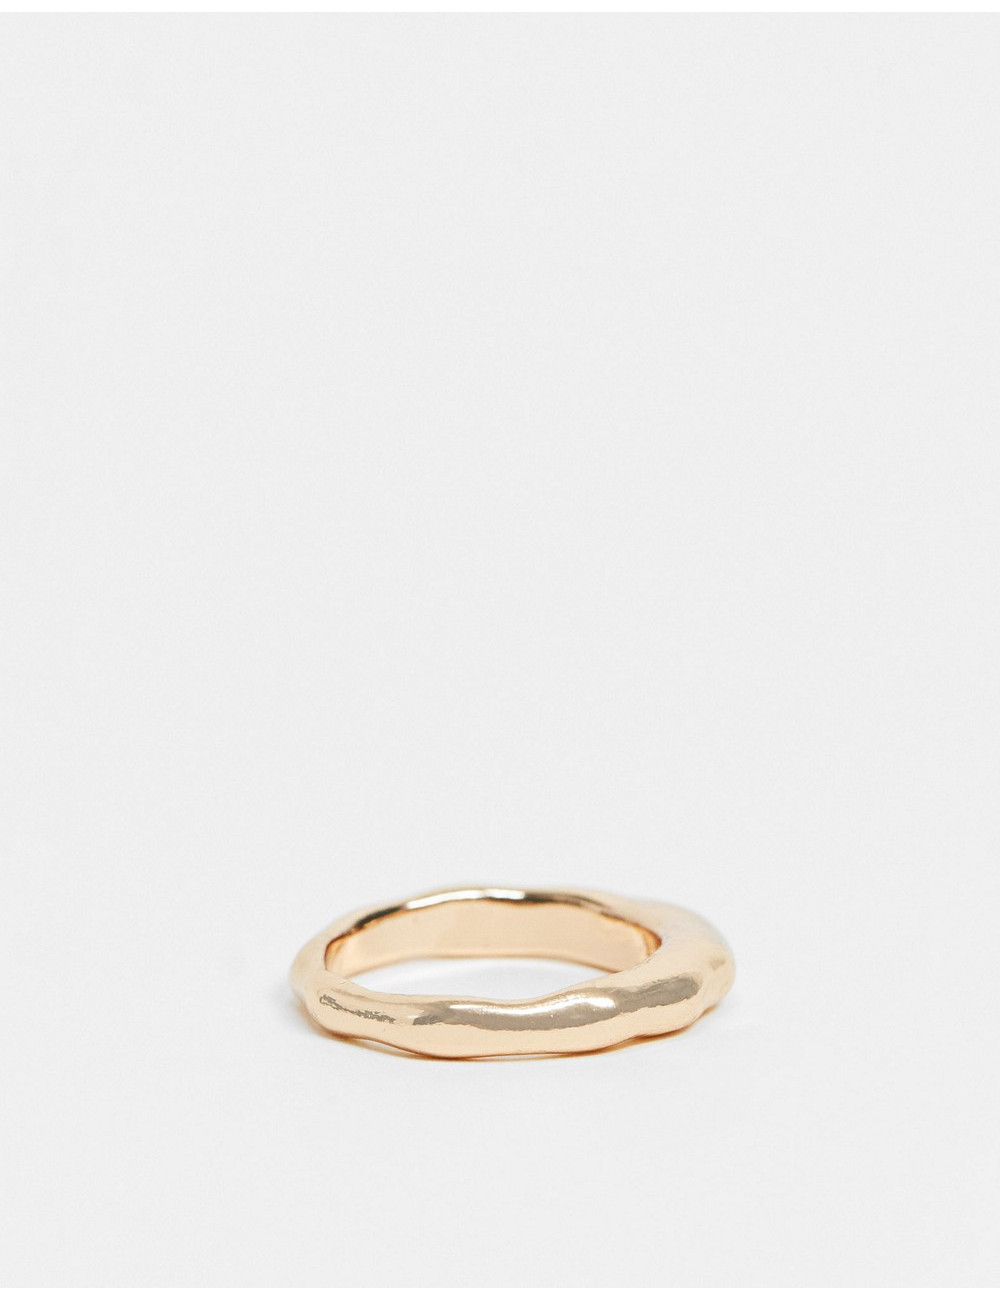 Weekday Helin ringpack in gold